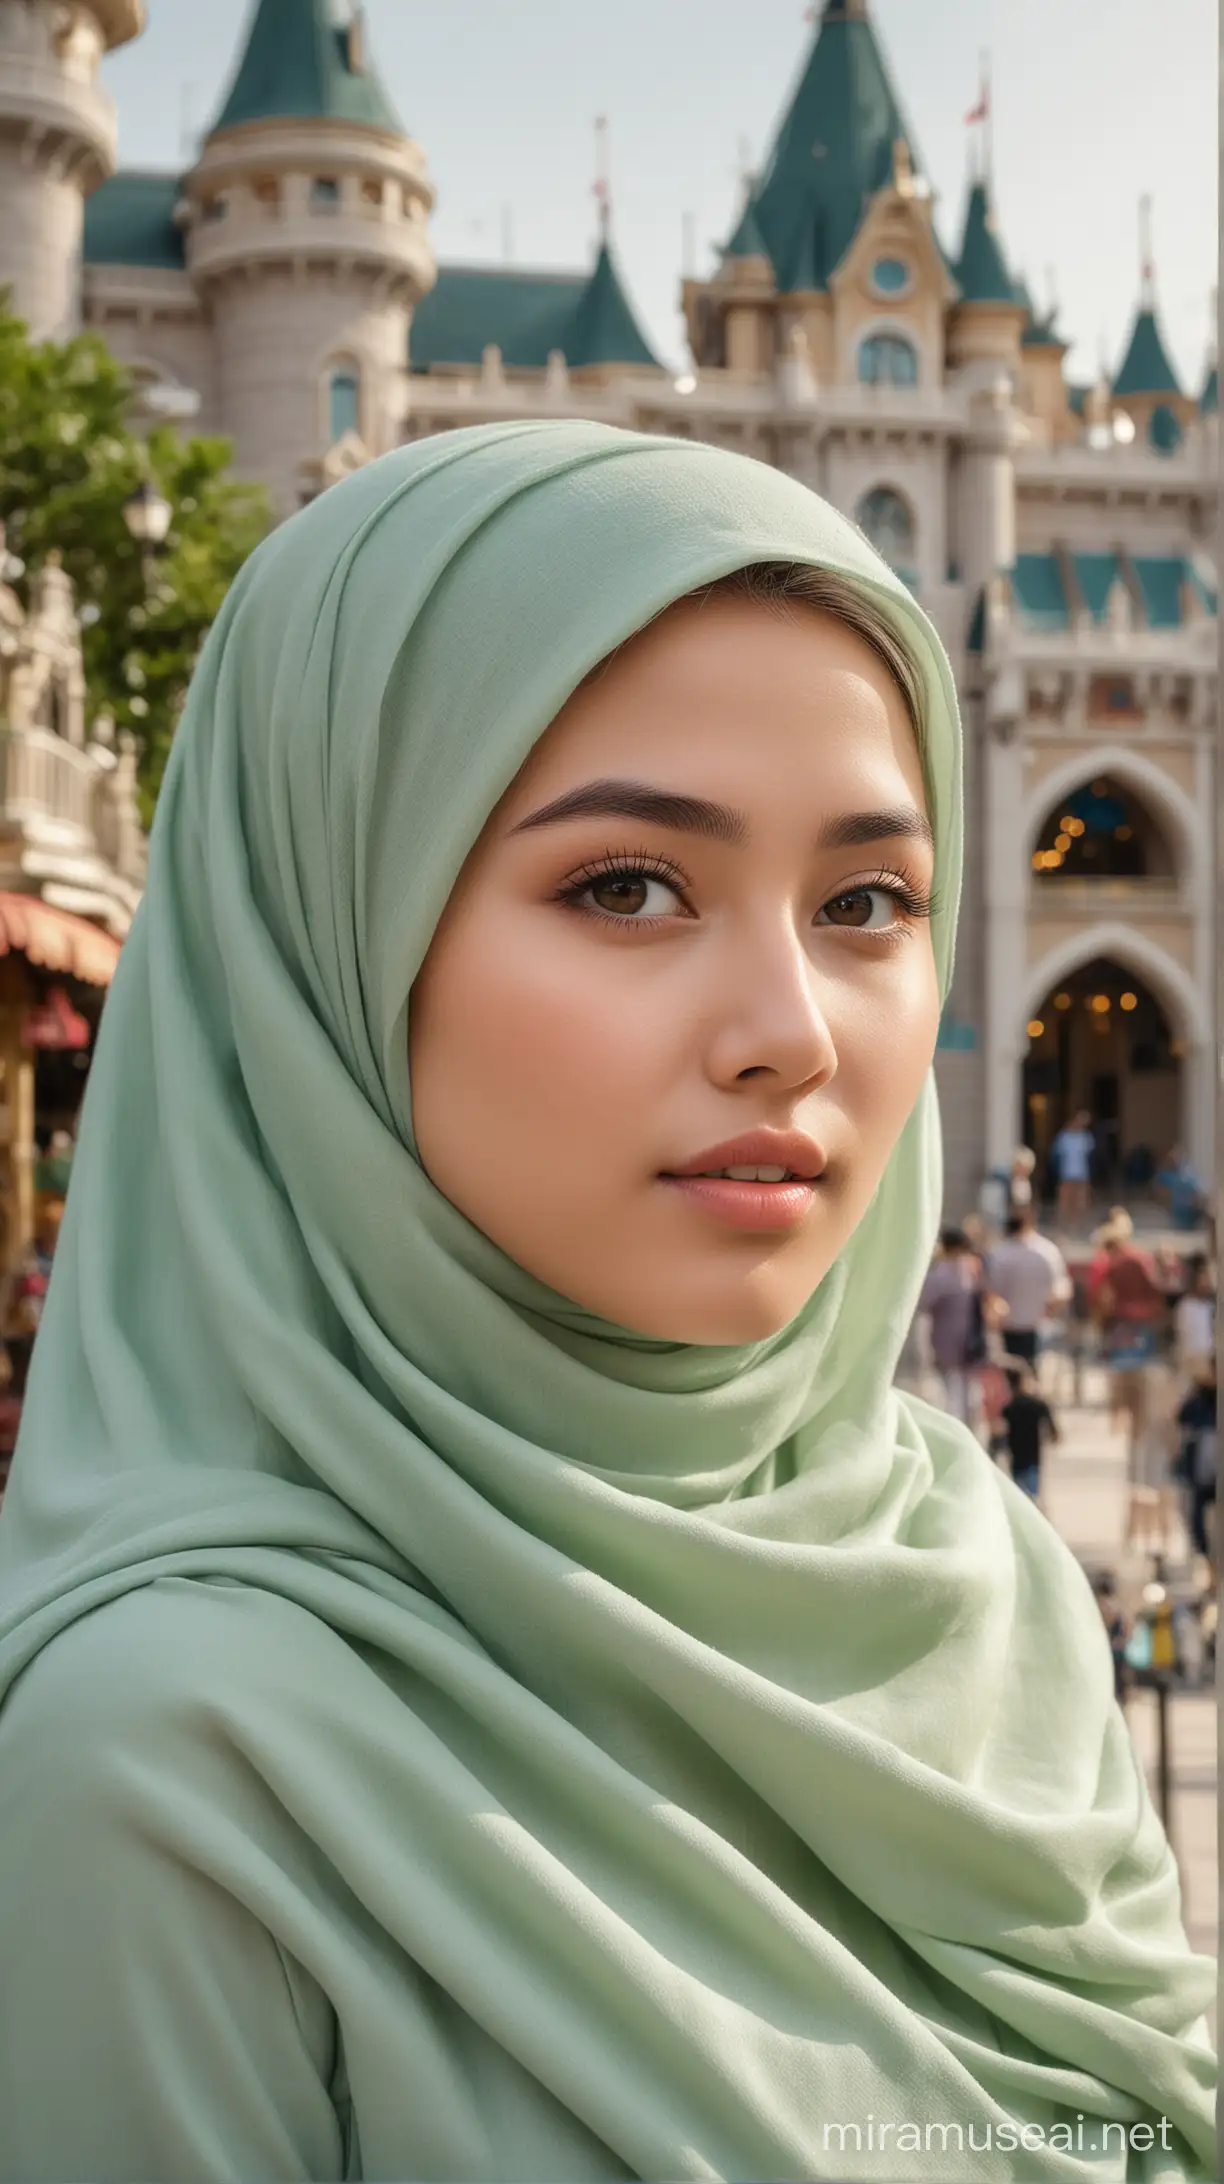 A Beautyful Woman,18 years old, oval face, clean face, sage hijab, Standing in front of the Hongkong Disneyland Resort 800mm lens, realistic, hyperrealistic, photography, professional photography, immersive photography, ultra HD, very high quality, best quality, medium quality, HDR photo, focus photo, deep focus, very detailed, original photo , original photo, very sharp, nature photo, masterpiece, award winning, taken with hasselblad x2d.